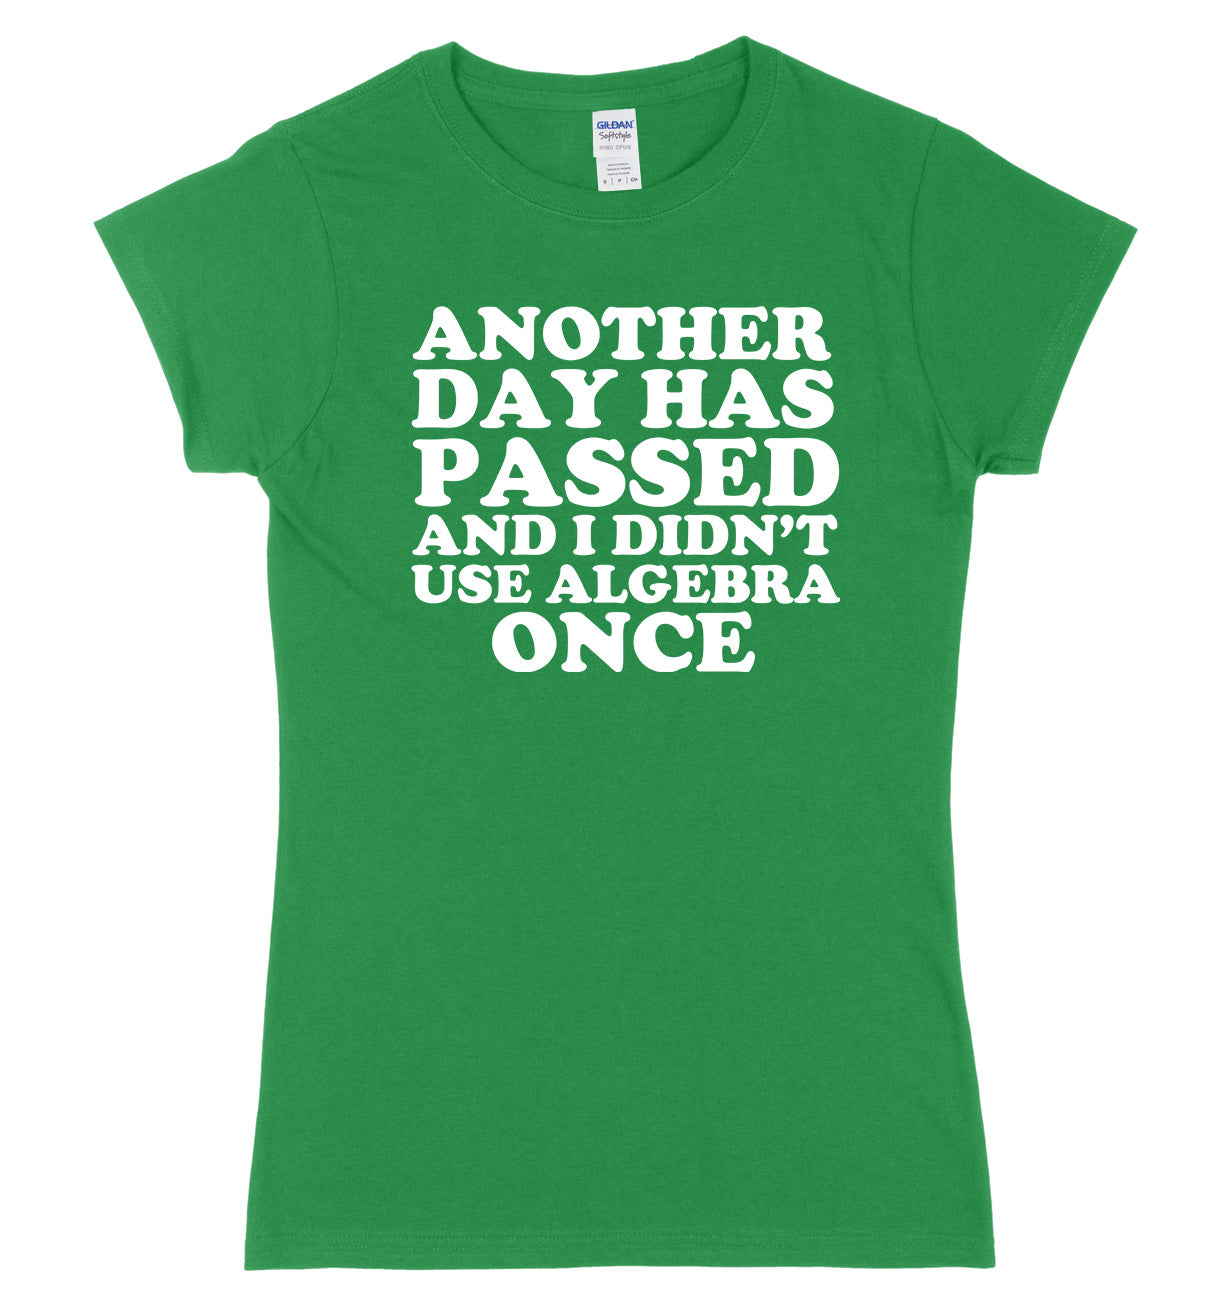 Another Day Has Passed And I Didn't Use Algebra Once Womens Ladies Slim Fit T-Shirt